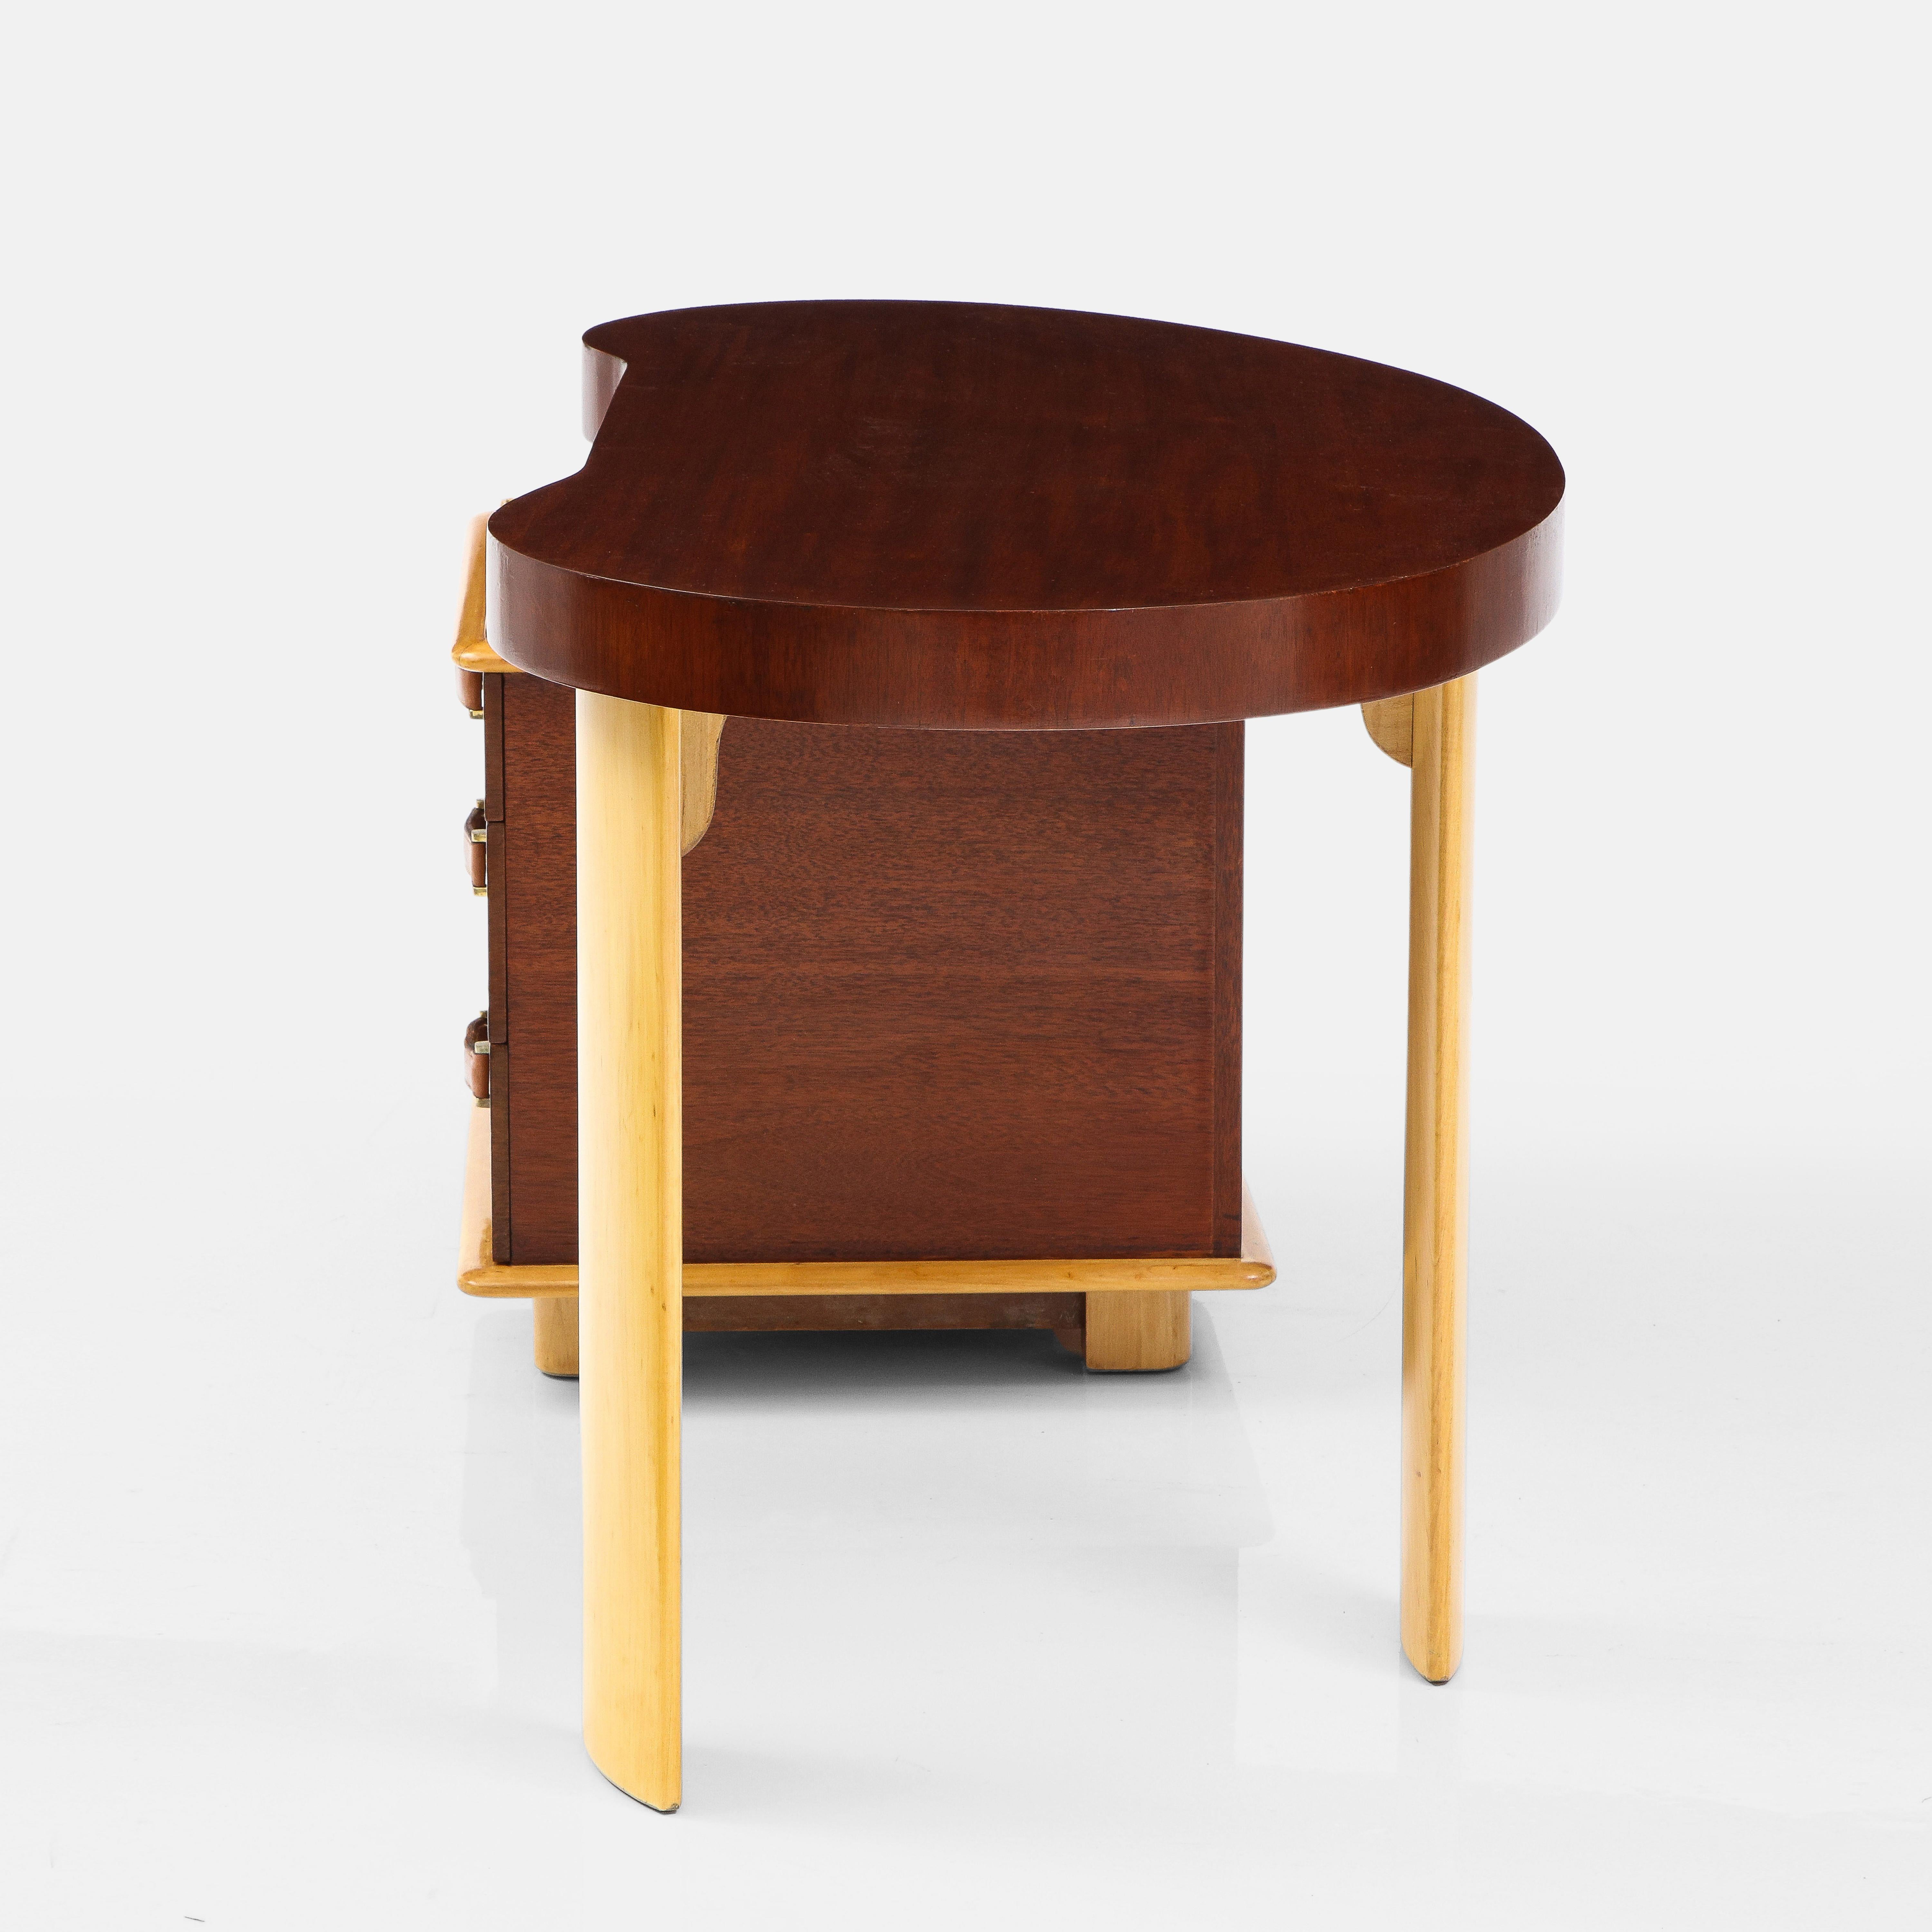 Mid-20th Century Paul Frankl Rare Kidney Desk in Mahogany, Birch, Leather and Brass, USA, 1950s For Sale